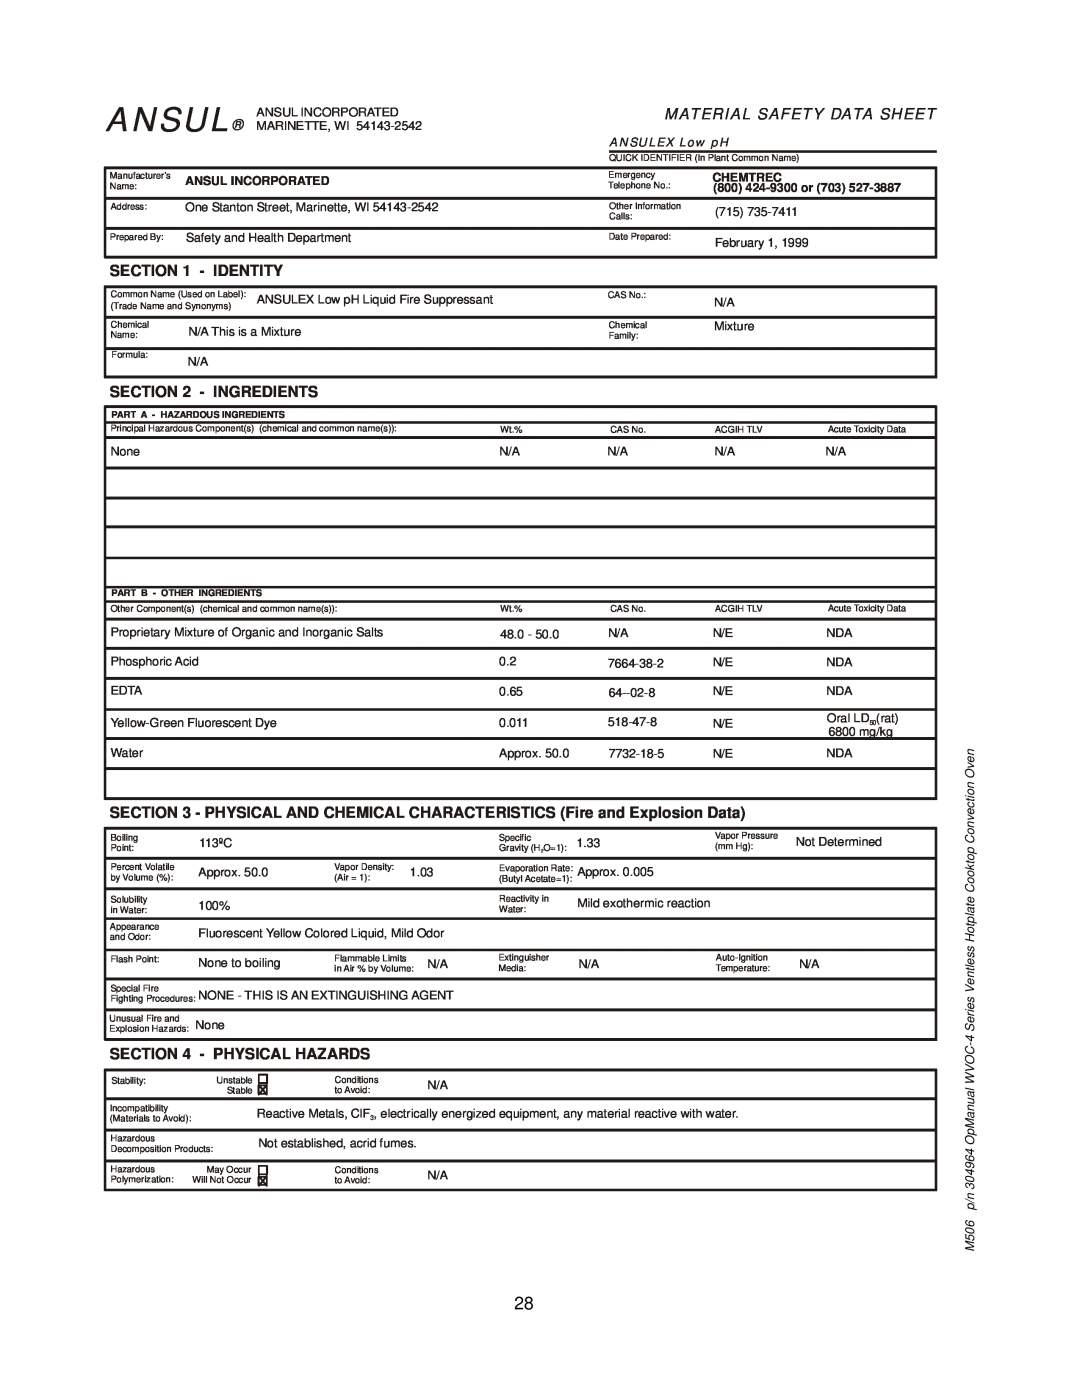 Wells WVOC-4HS Ansul, Material Safety Data Sheet, Identity, Ingredients, Physical Hazards, ANSULEX Low pH, Chemtrec 